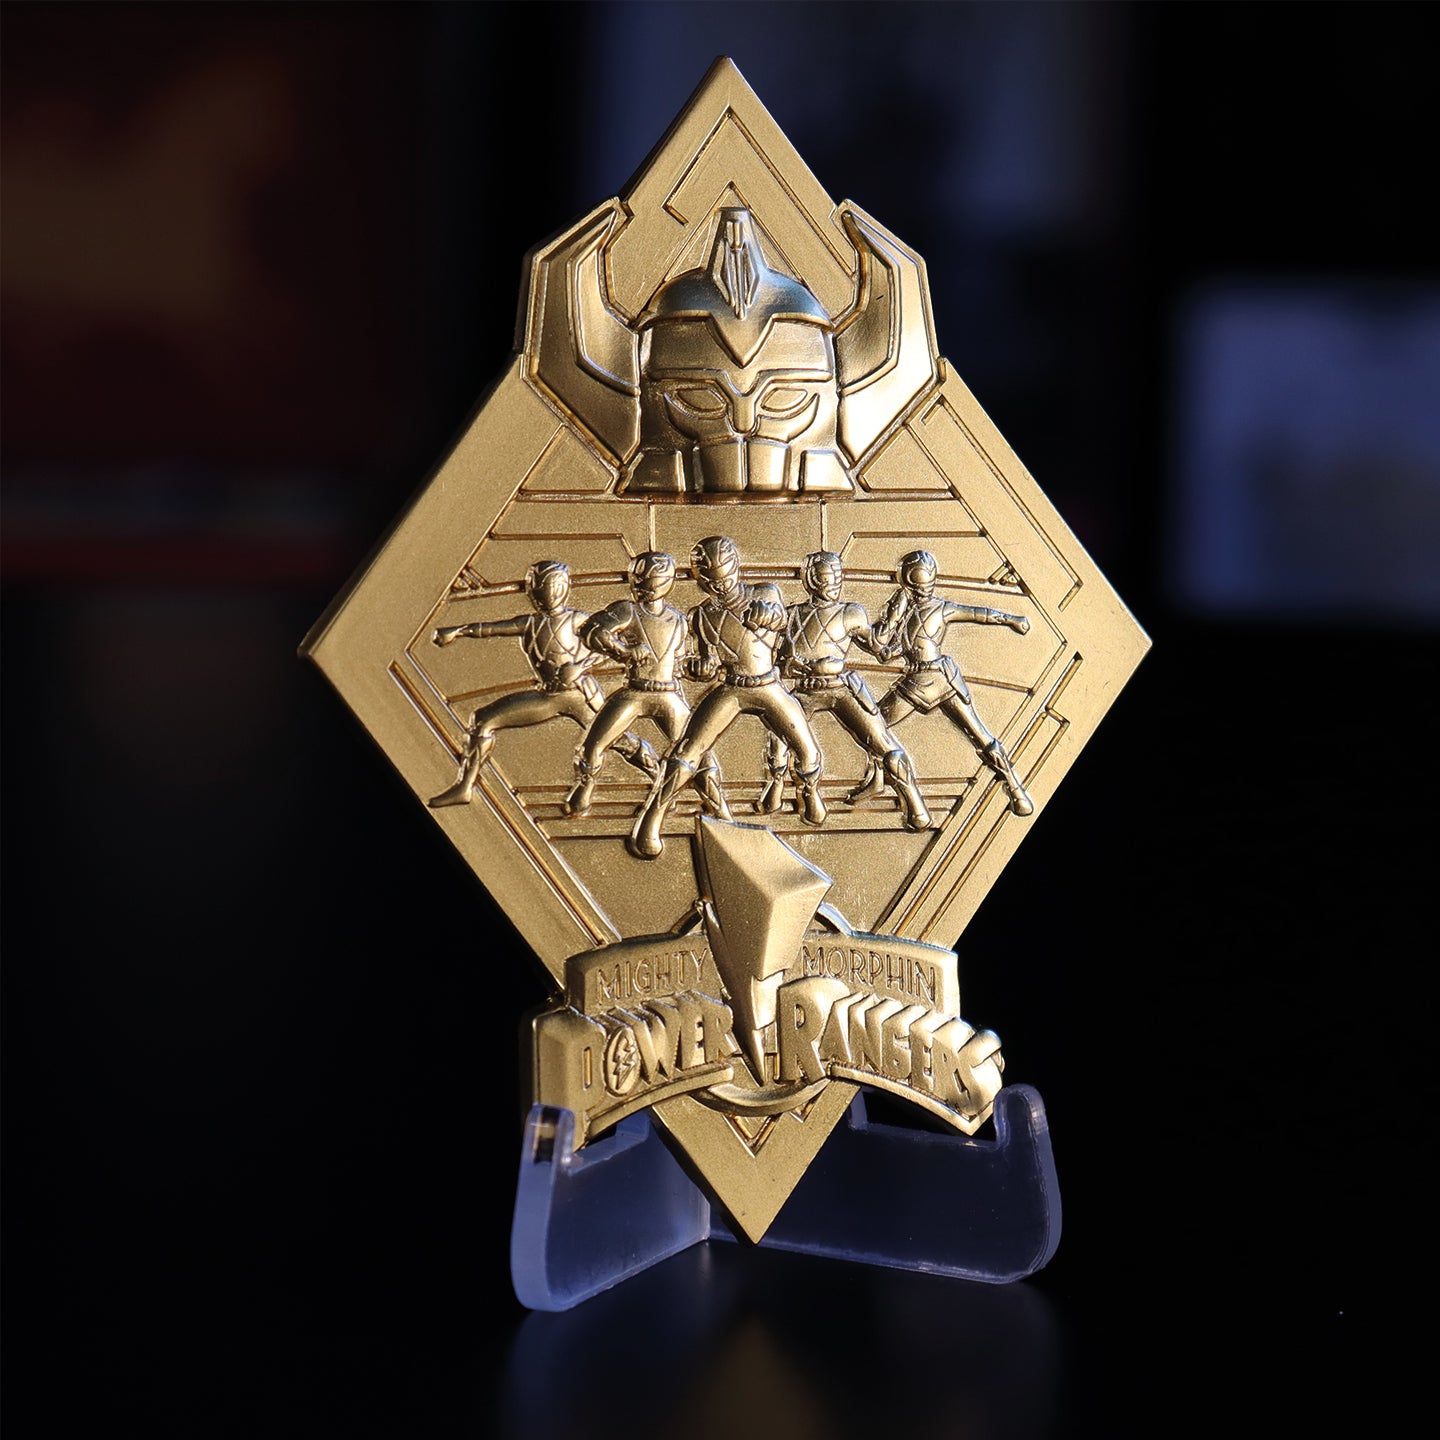 Power Rangers Limited Edition 24k Gold Plated Medallion